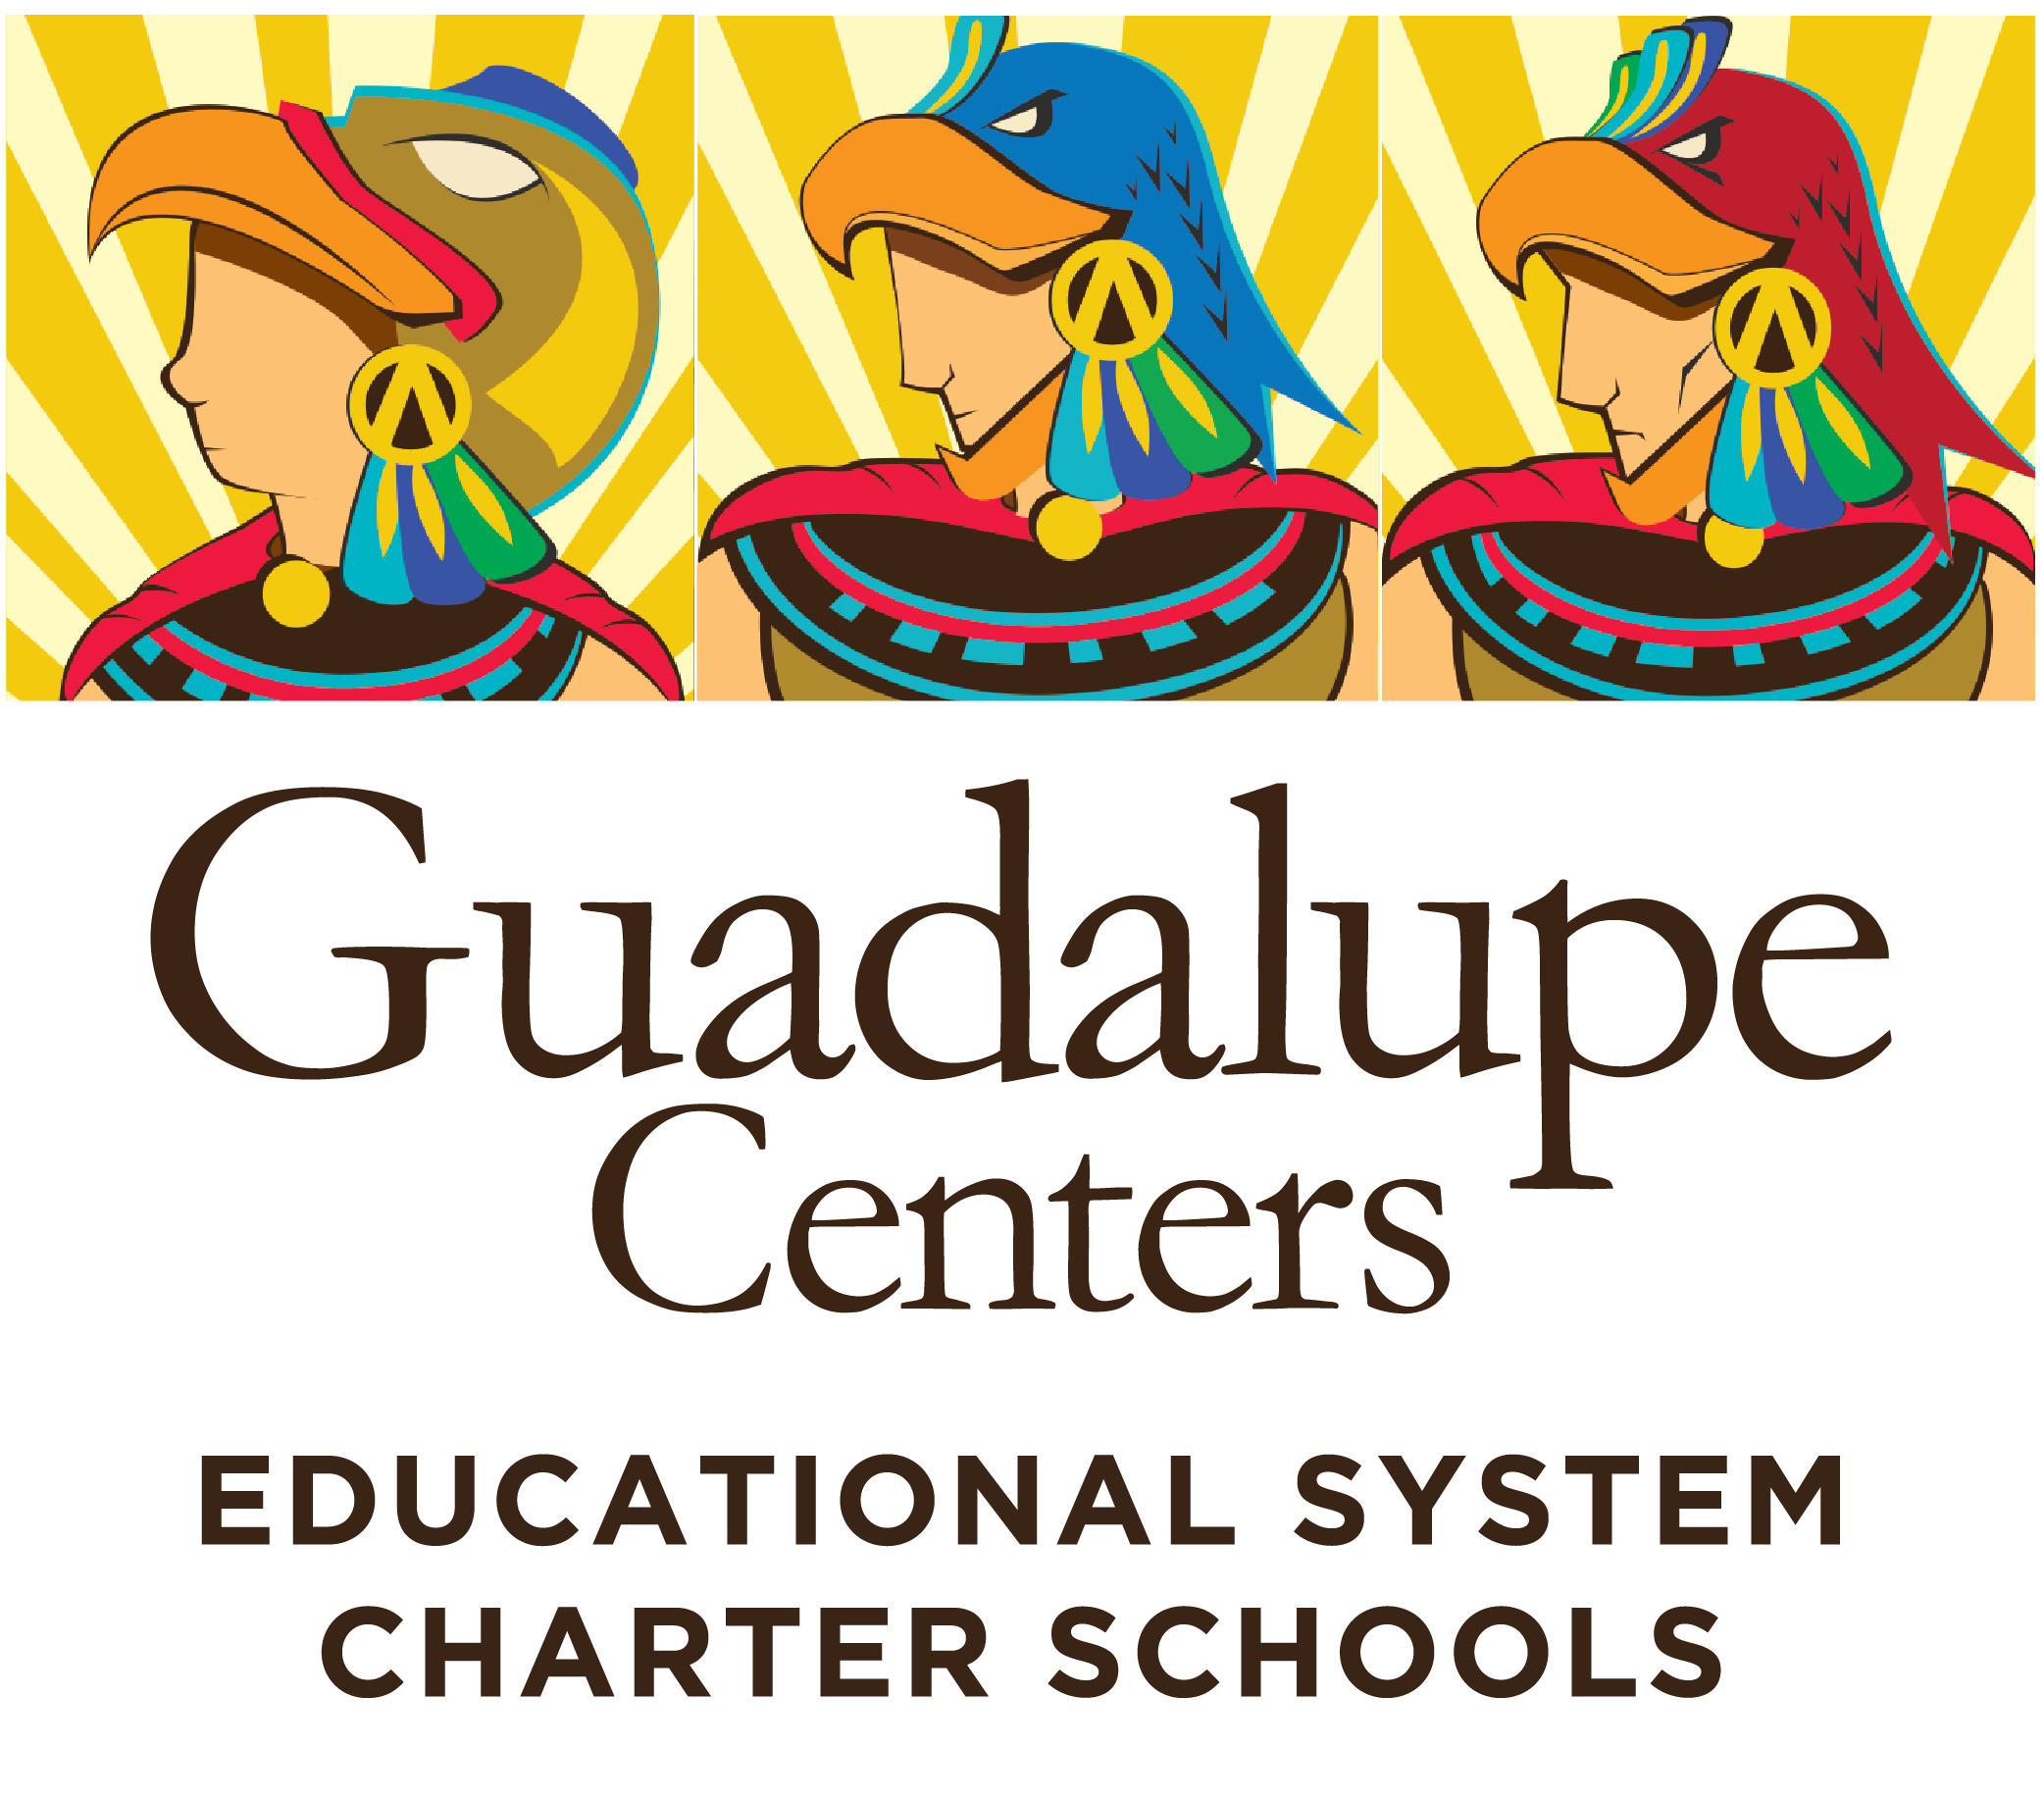 Guadalupe Centers Educational System Charter Schools